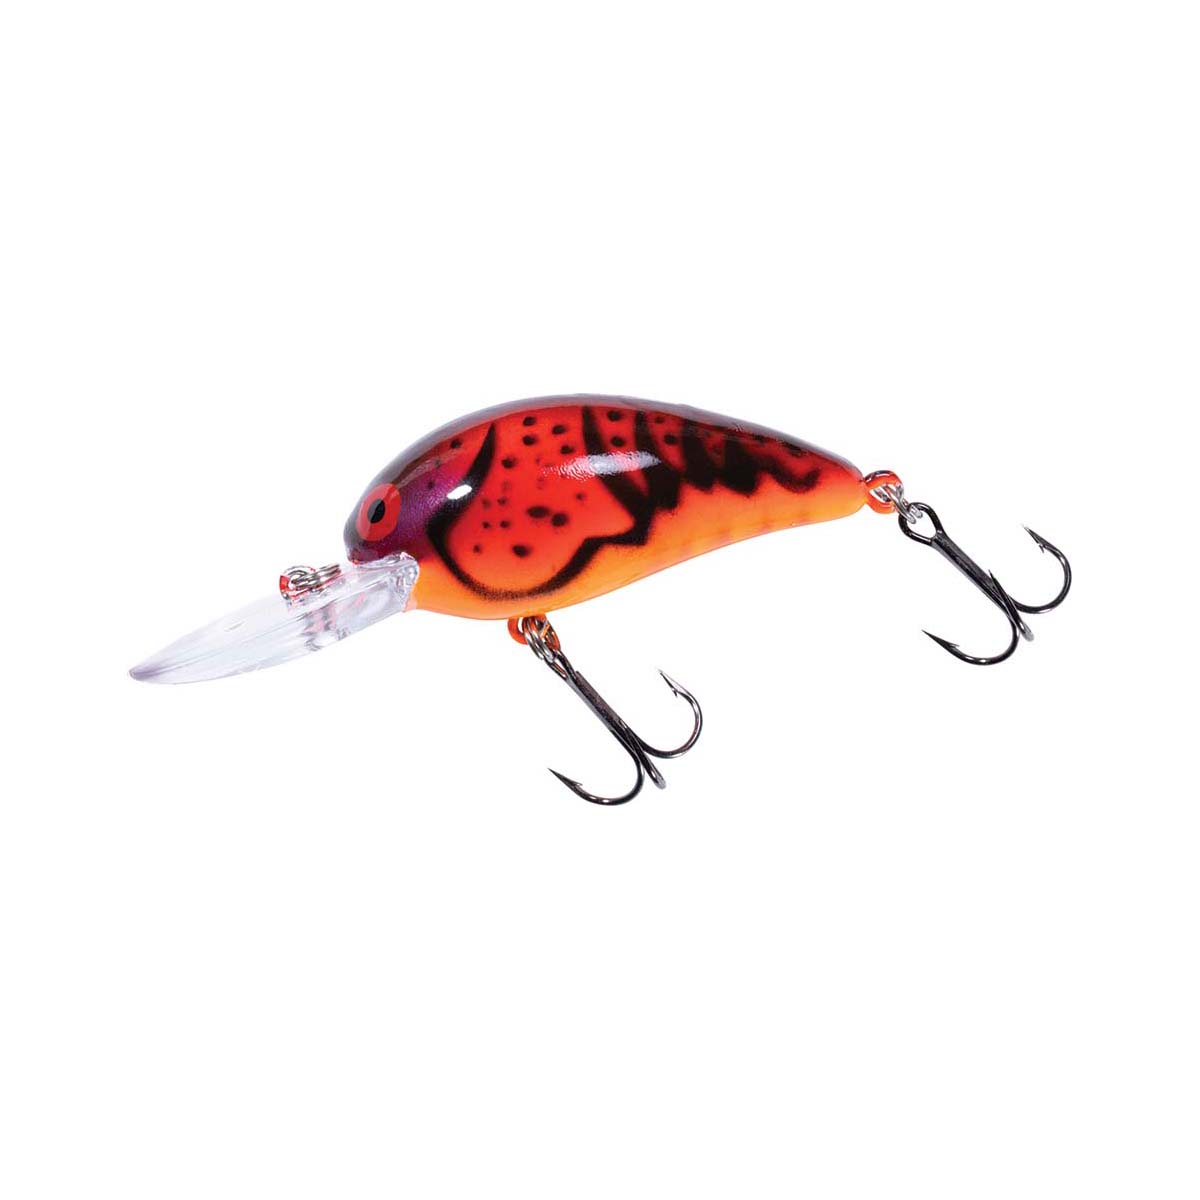 Bomber Flat A Hard Body lure 63mm Mad Craw